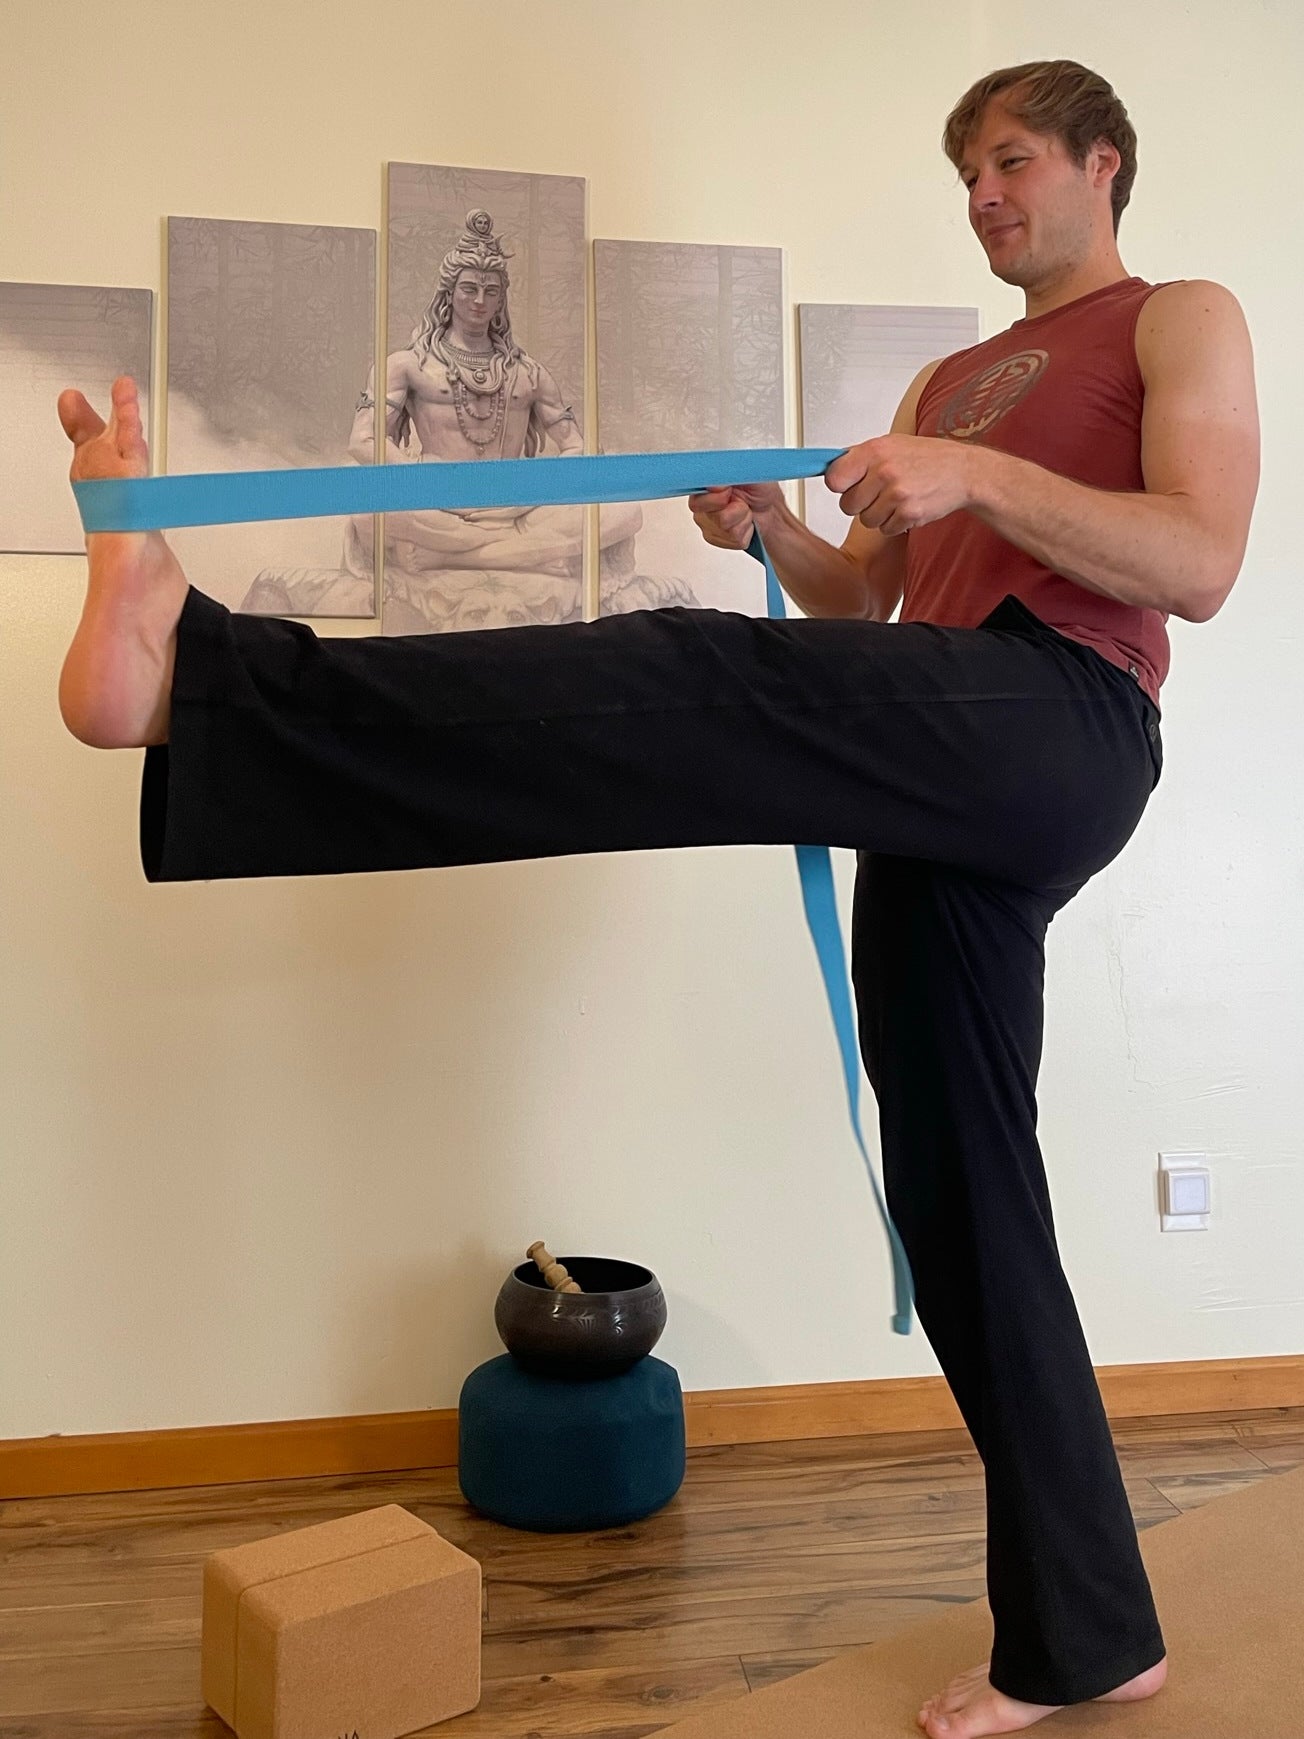 Odyssey Yoga Strap in color Turquoise used to support a standing leg raise posture